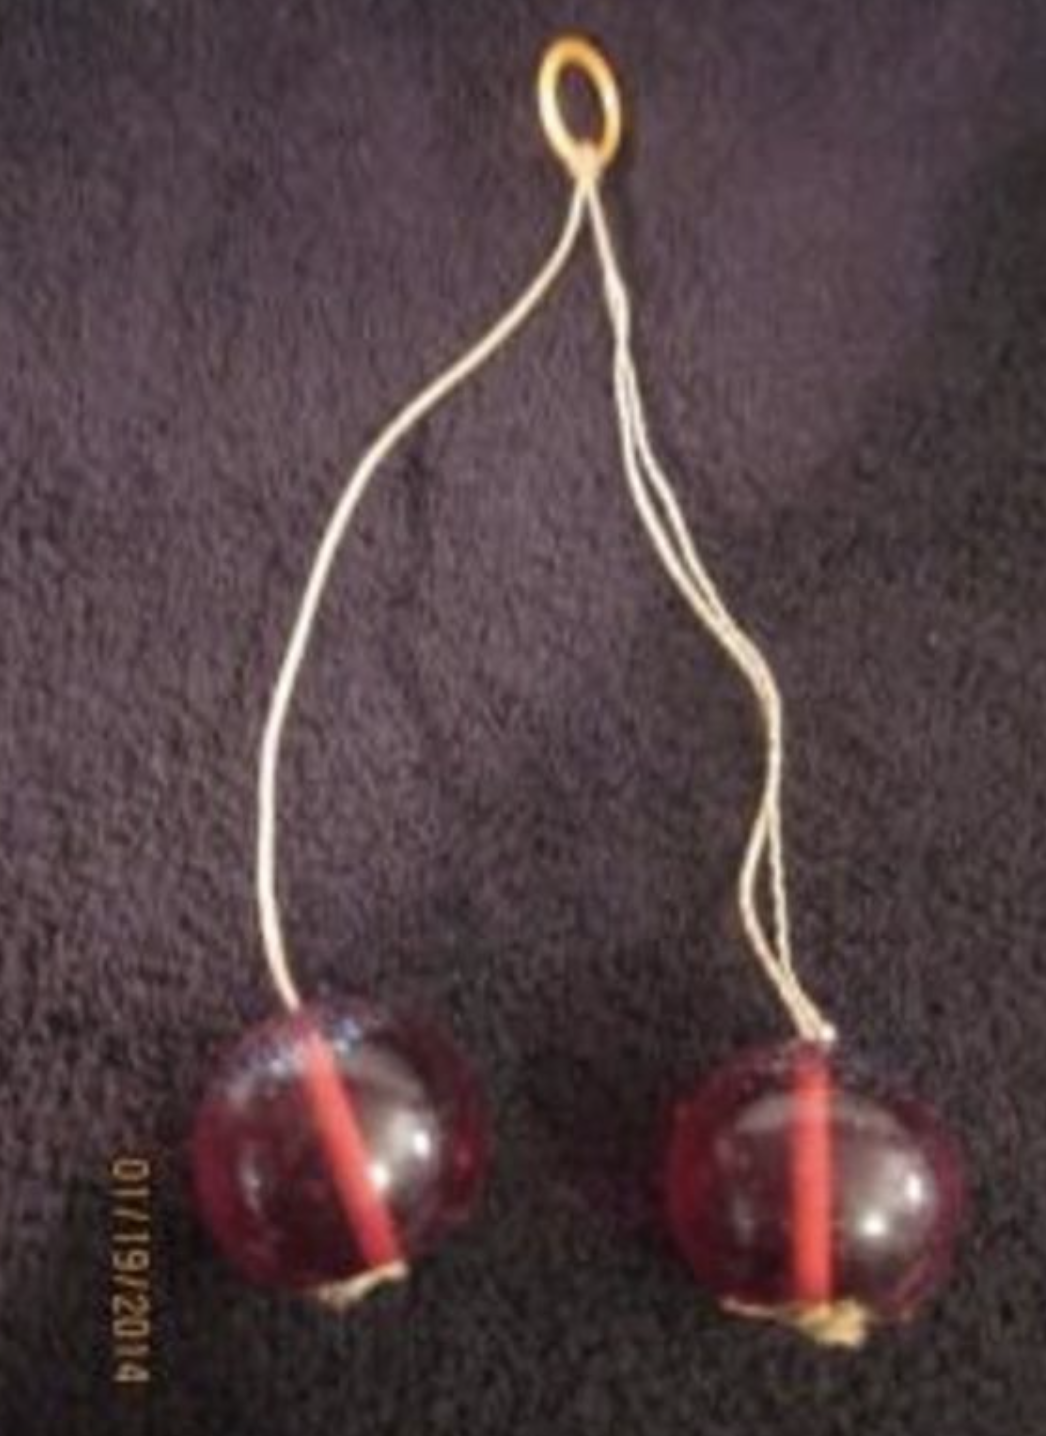 Remembering the Curious World of Toy Clackers